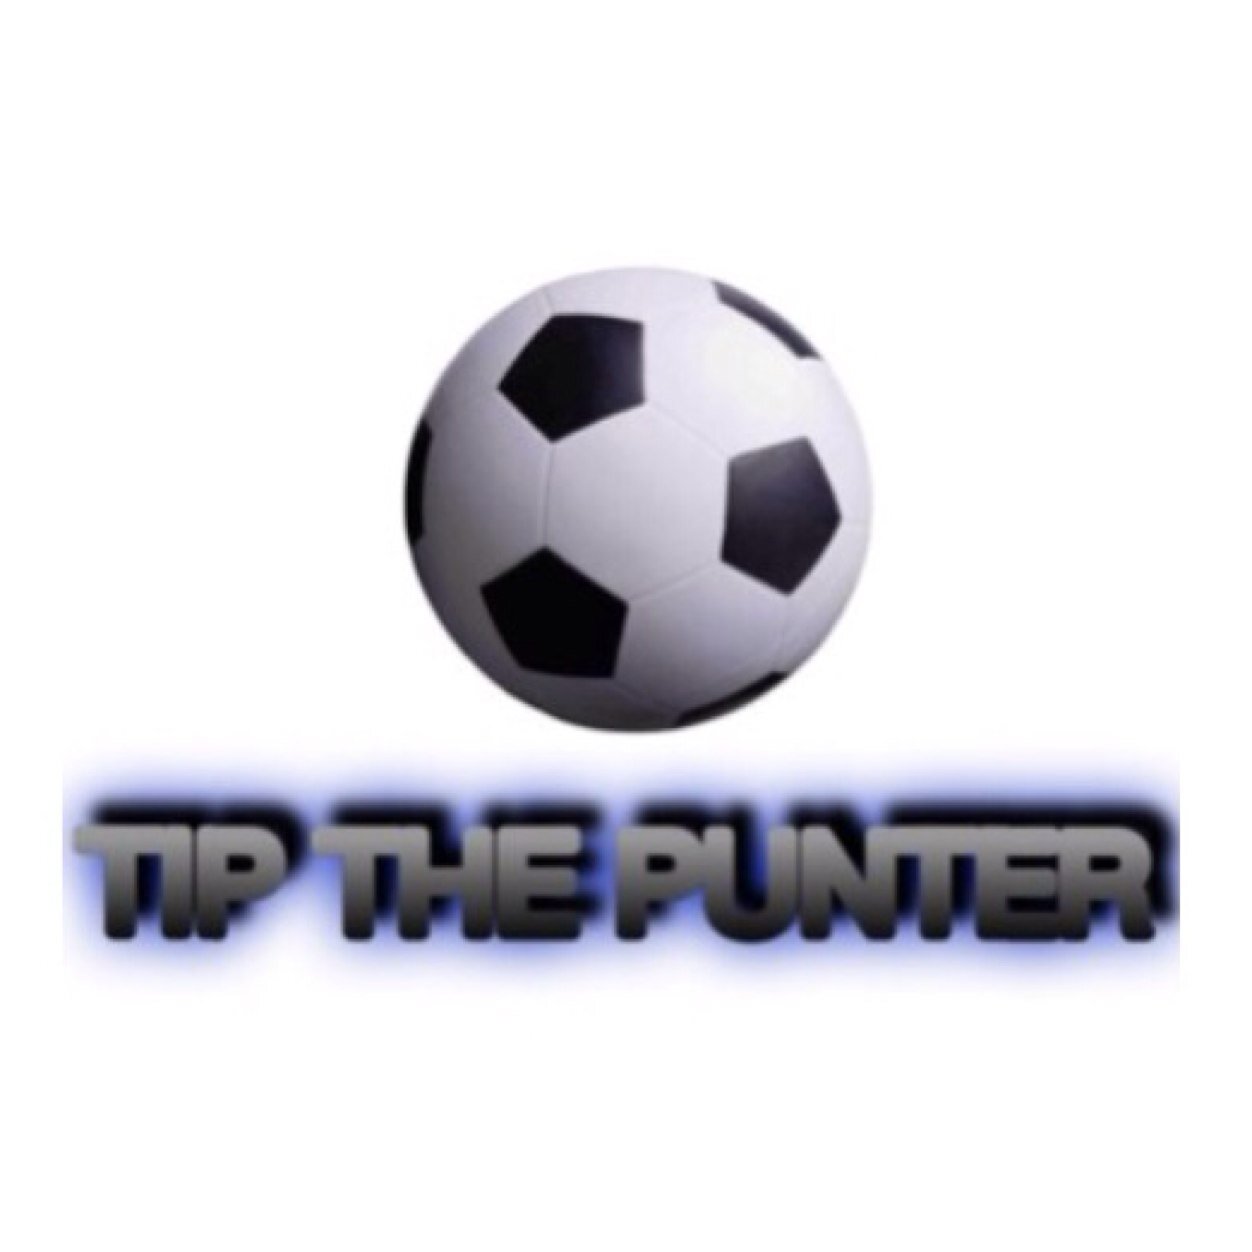 Football tips guarenteed to make you money. Website coming soon.